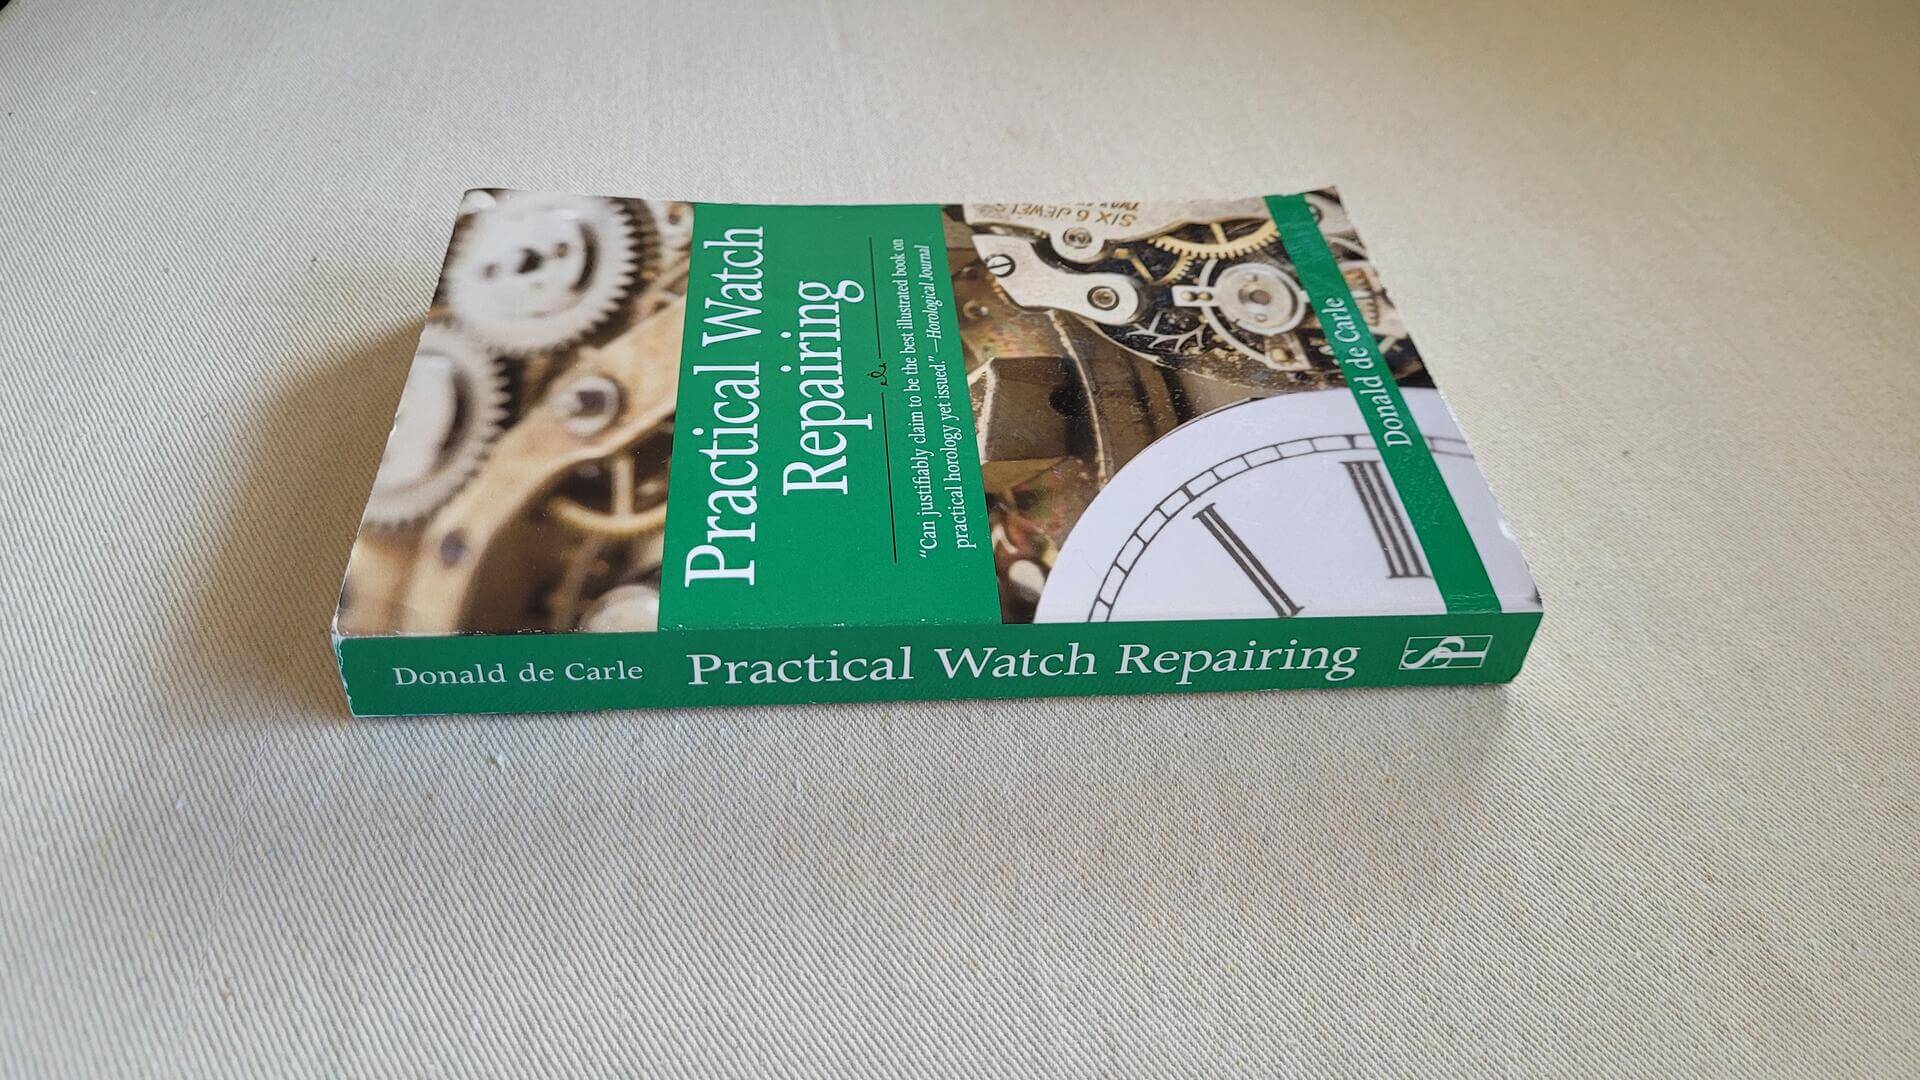 Called "the best illustrated book on practical horology ever written" essential classic book for any horologist w 550 black & white illustrations